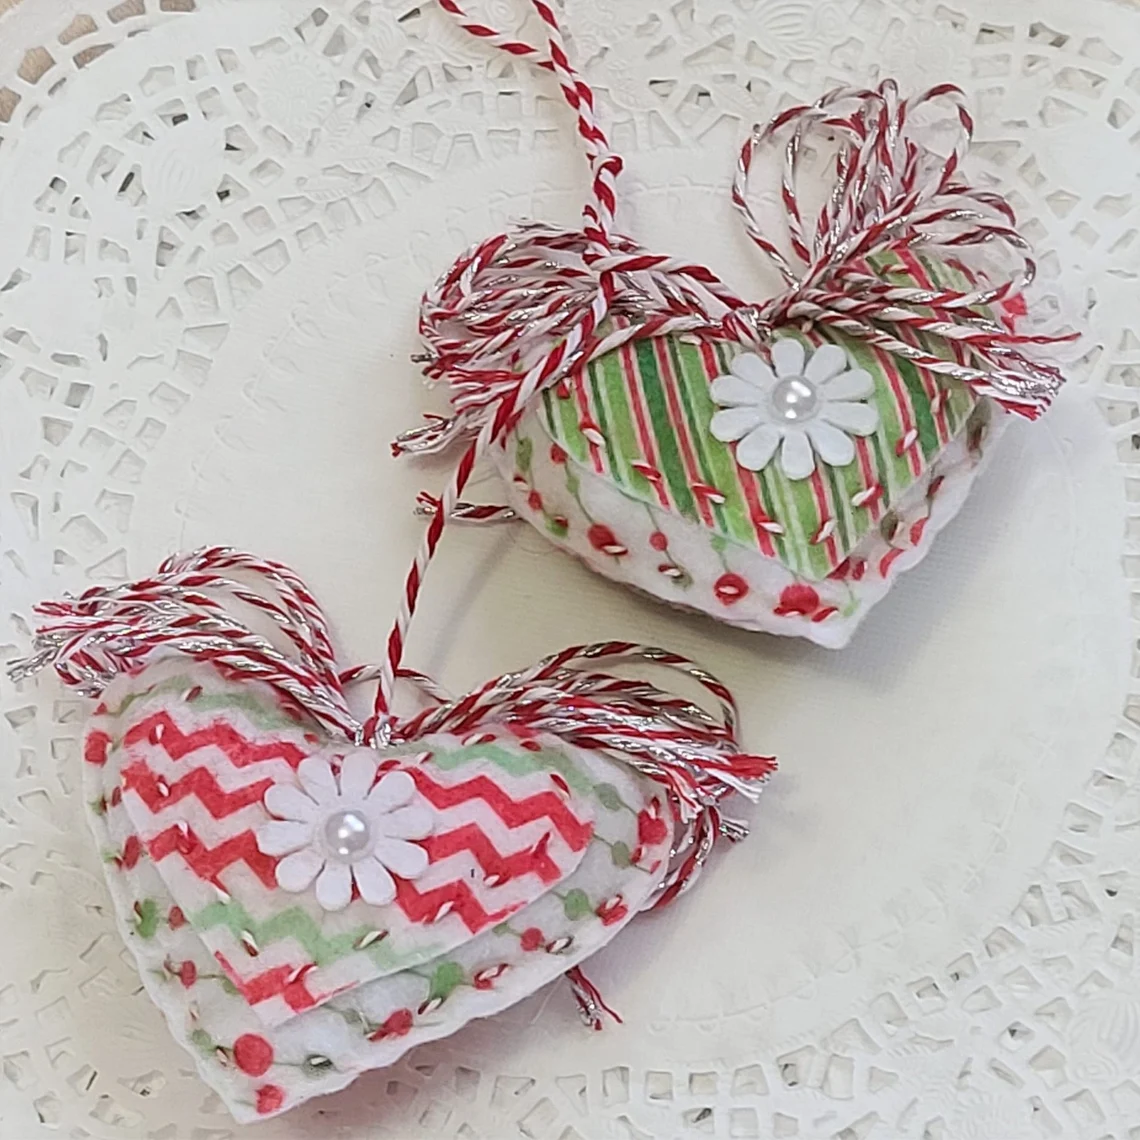 Double heart ornaments whimsical green and red colors